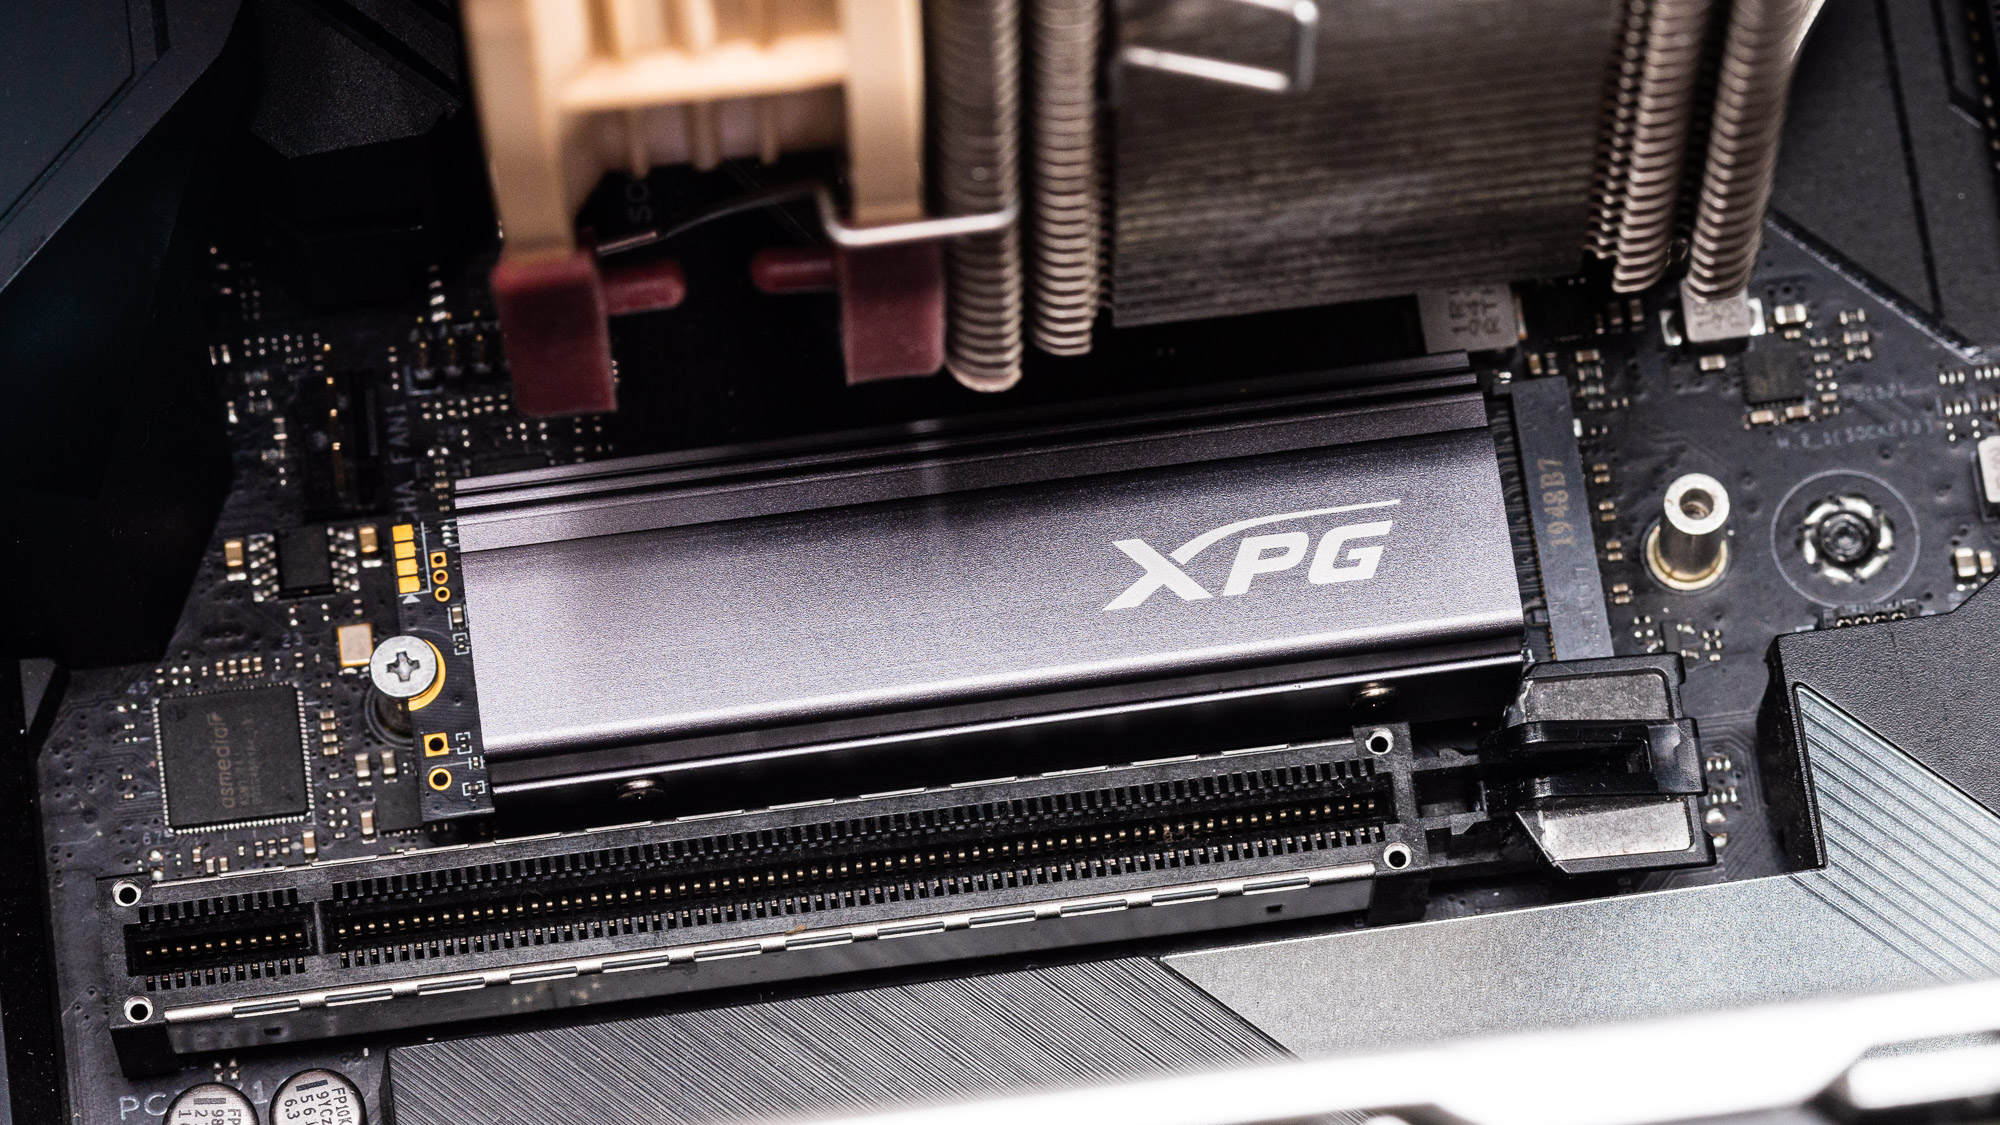 ADATA XPG PCIe Gen 5 SSD with Active Cooling Pictured